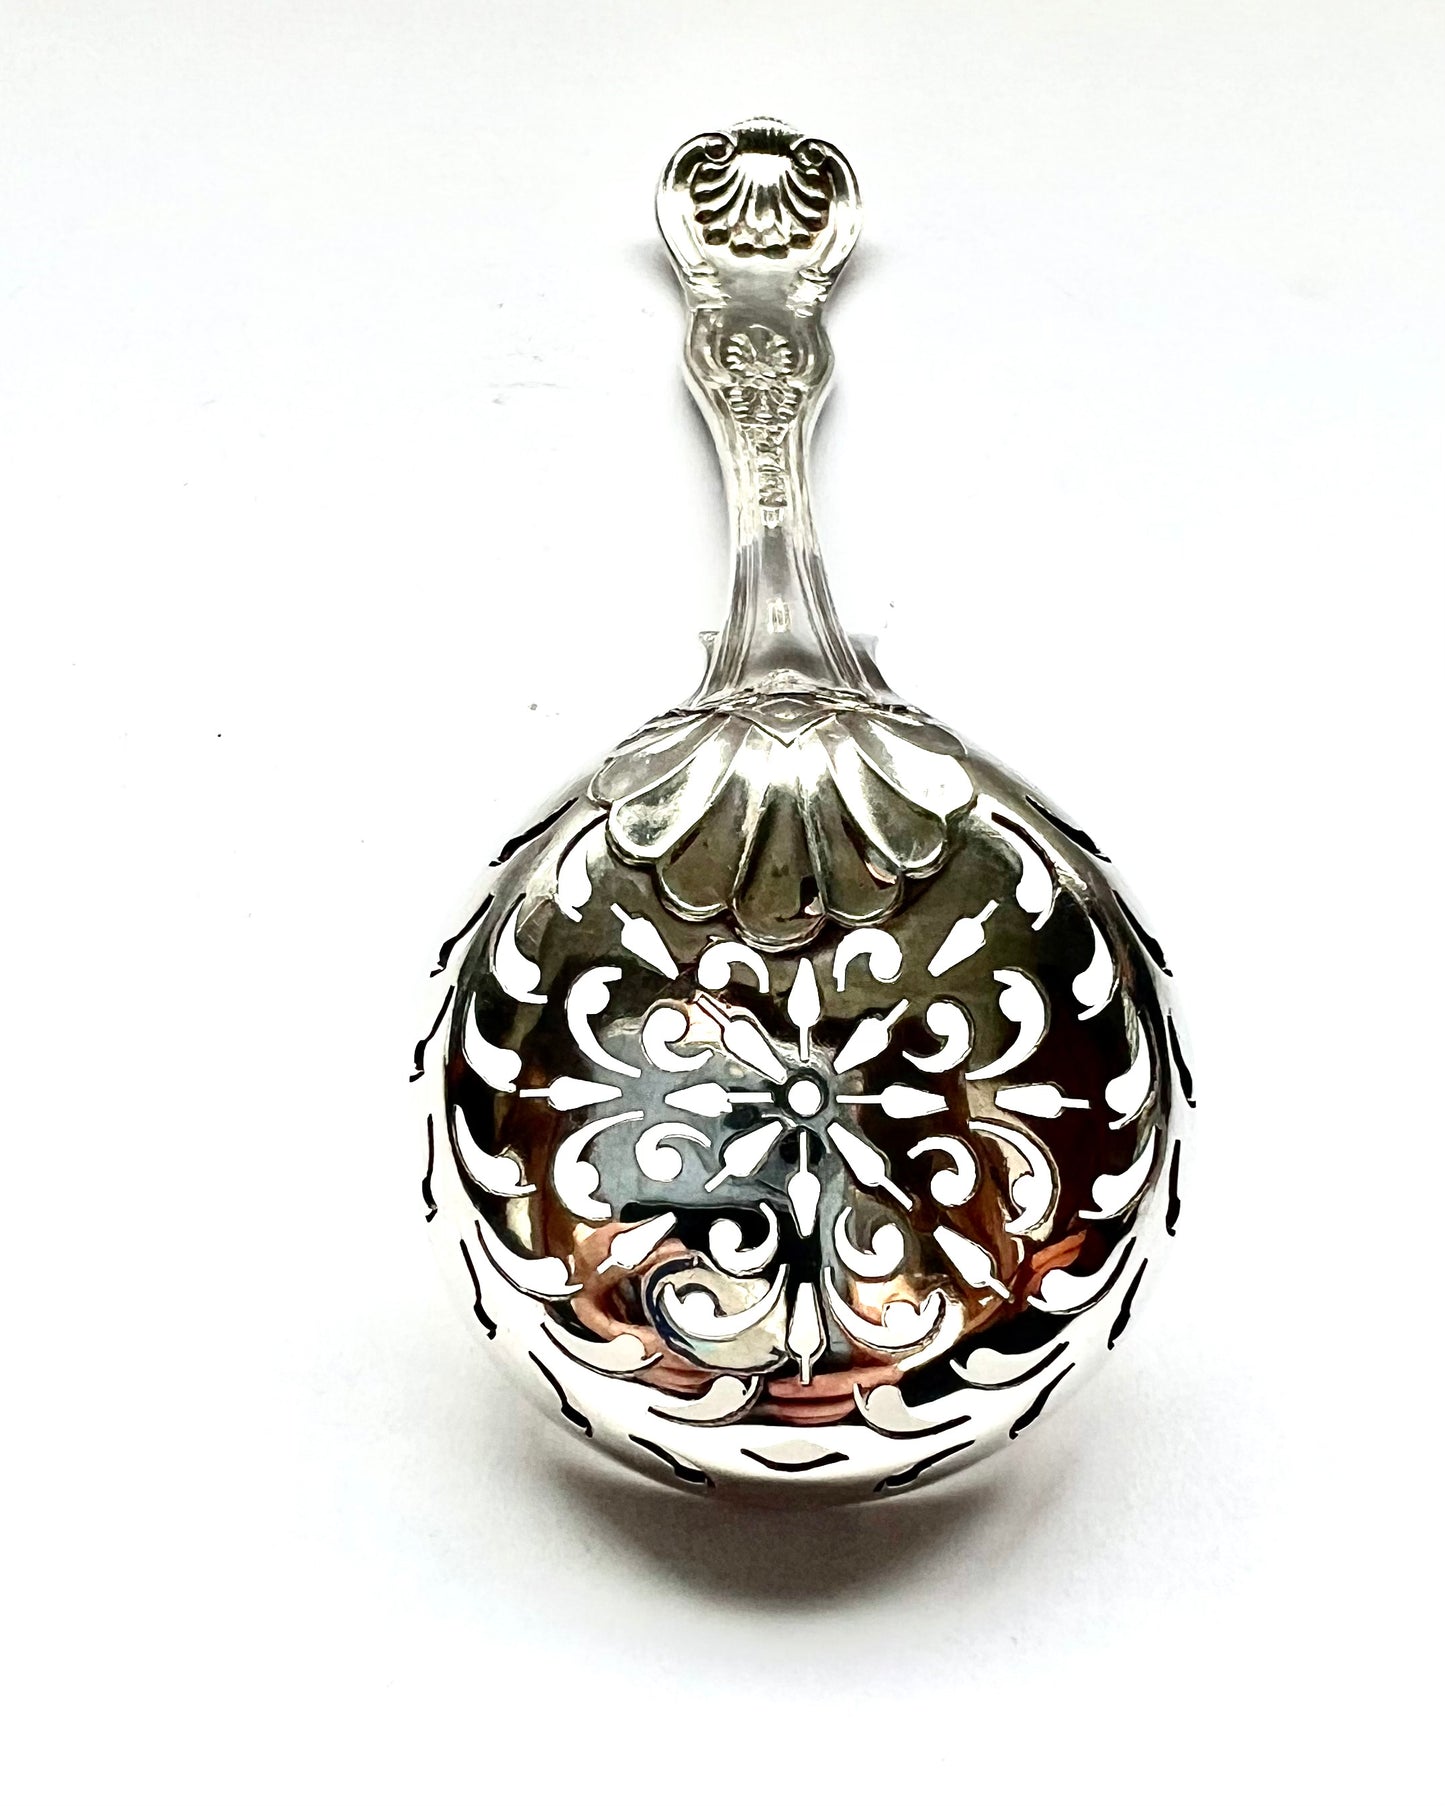 Antique High Victorian sterling silver sugar sifter, double struck in King’s Pattern. Marks for Francis Higgins II, London, 1861